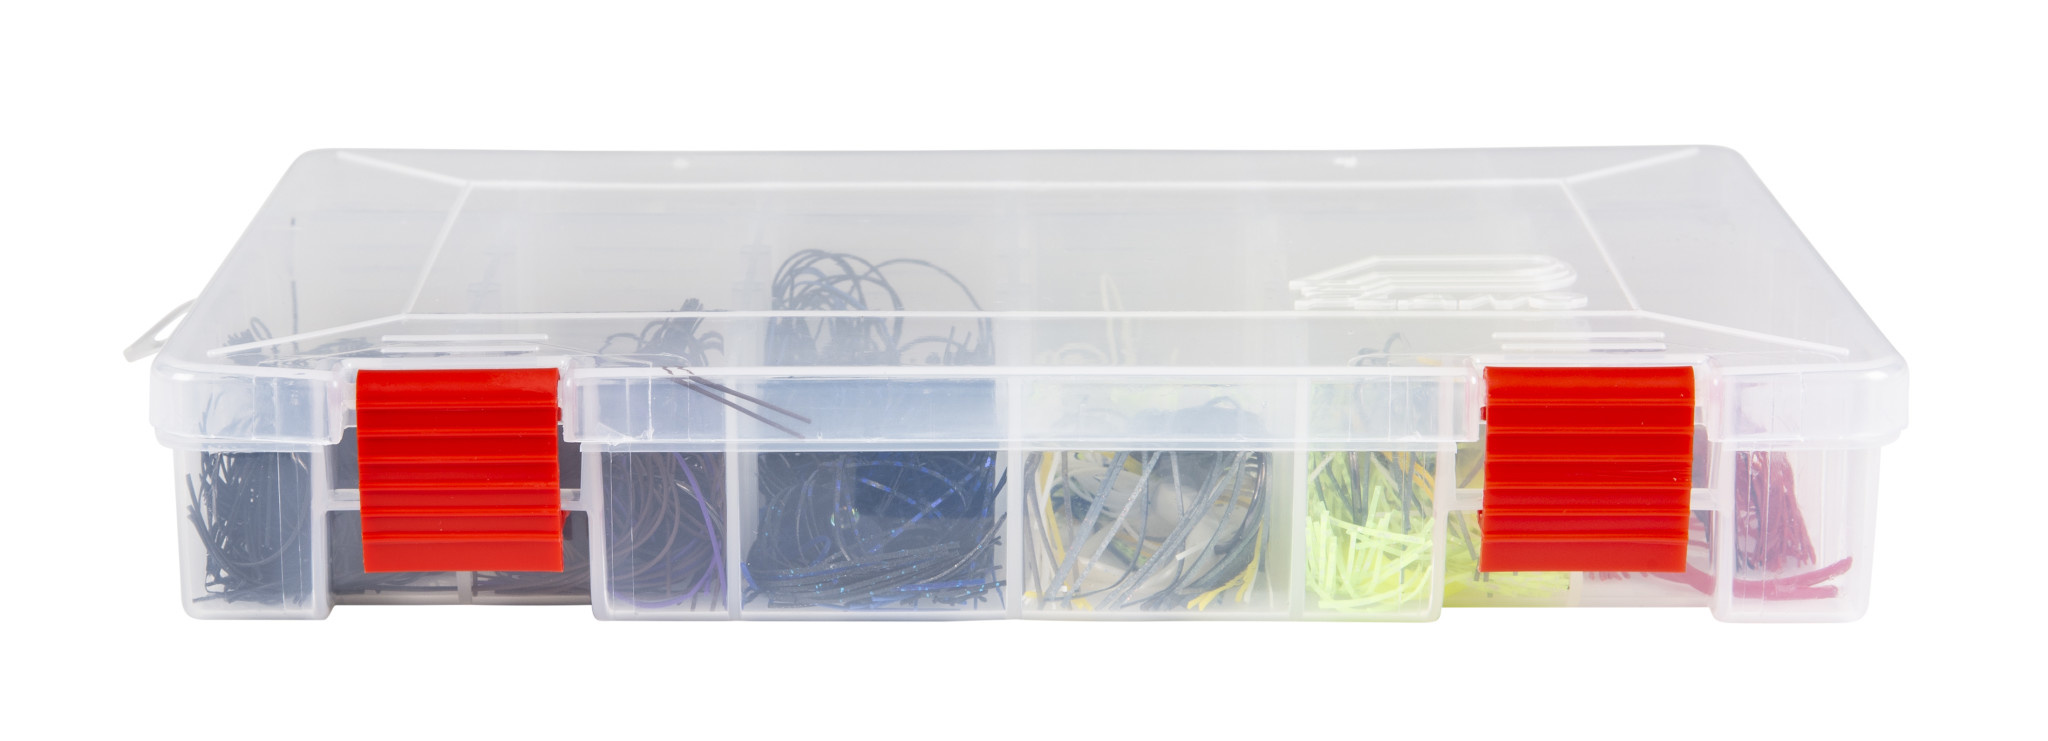 Pro Latch 3600 Clear Tackle Box By Plano